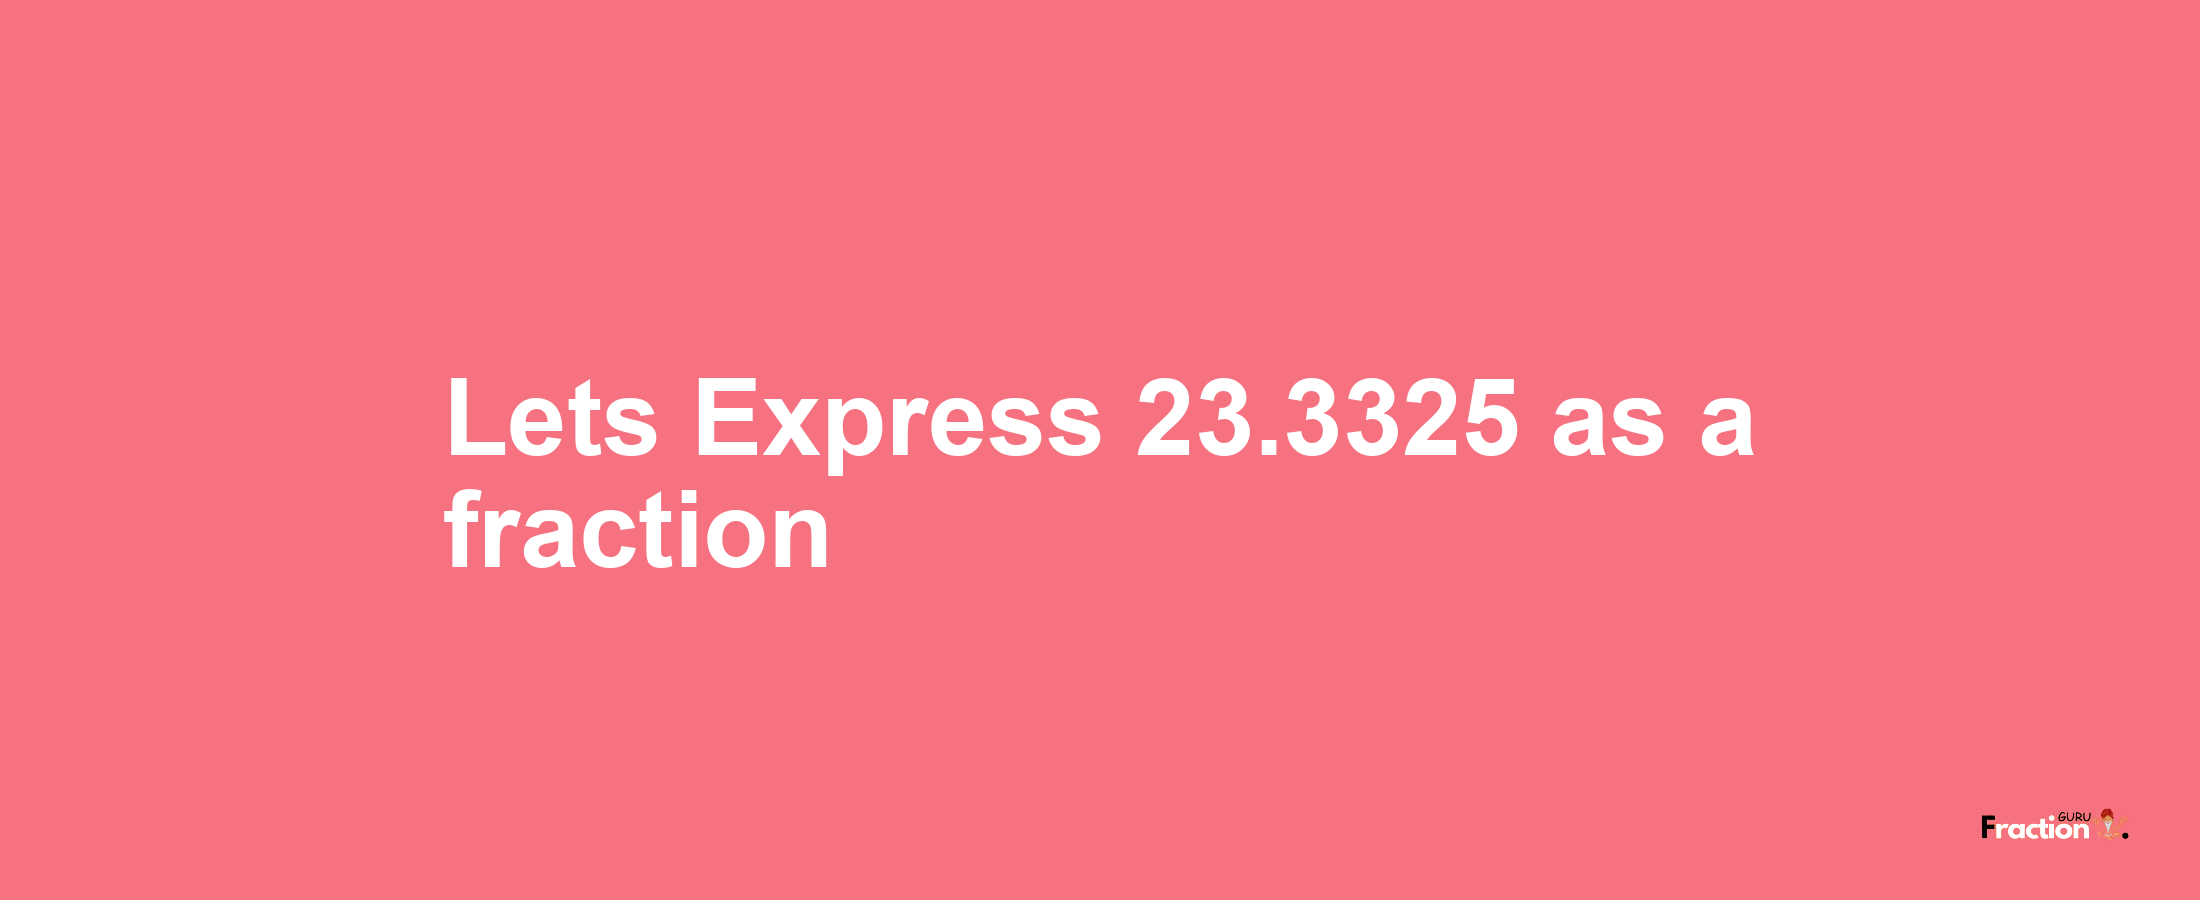 Lets Express 23.3325 as afraction